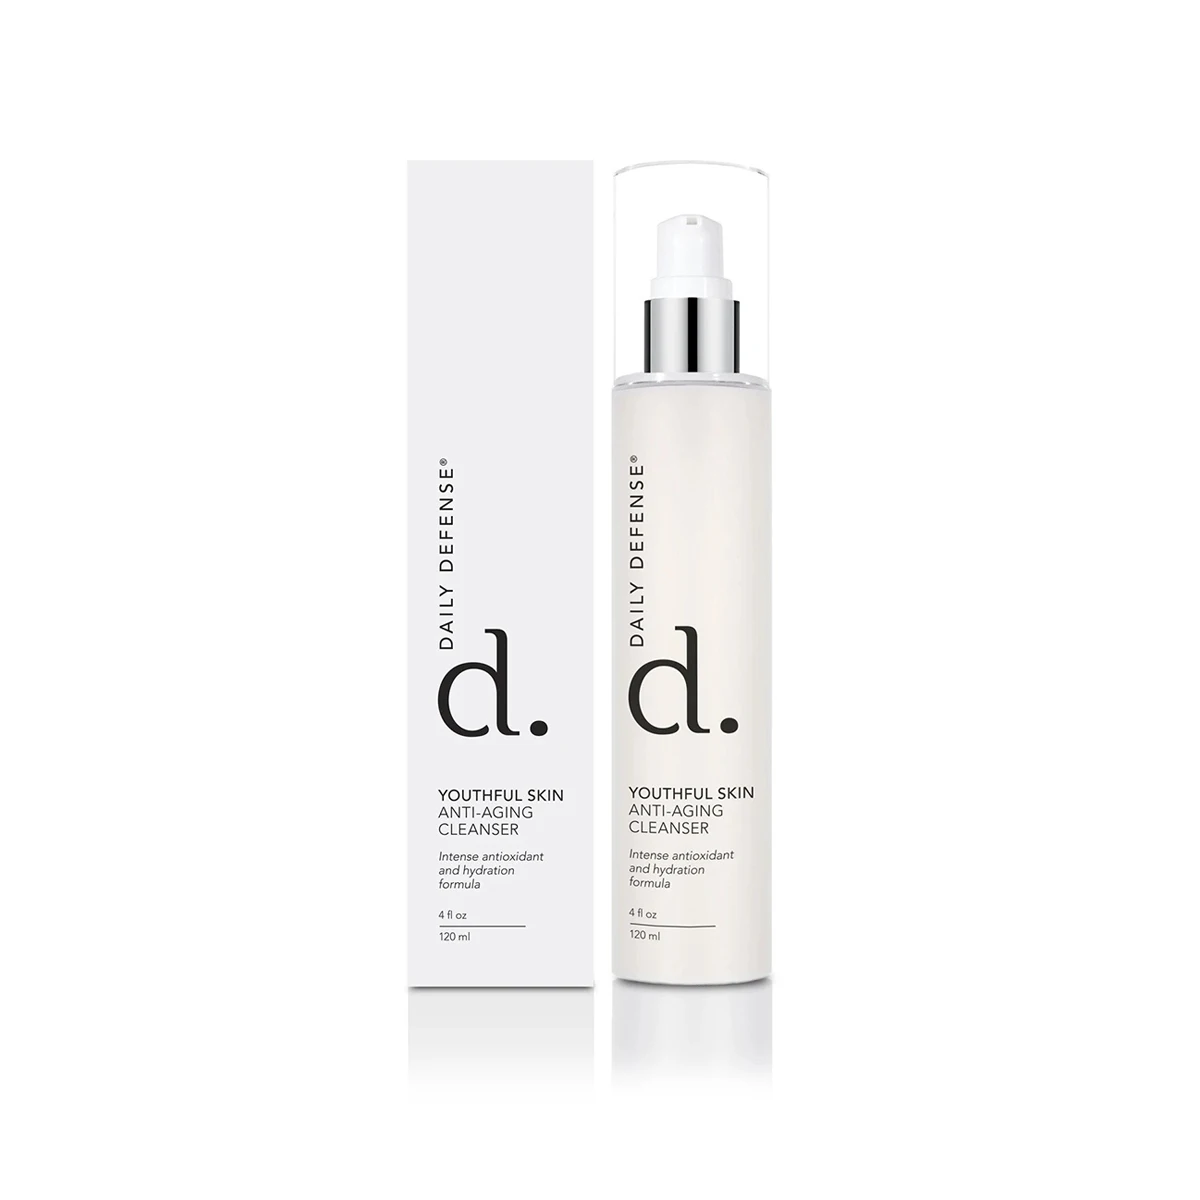 Daily Defense Skin Anti Aging Cleanser-Intense Antioxidant And Hydration Formula Skin Care Cleanser For Youthful Complexion